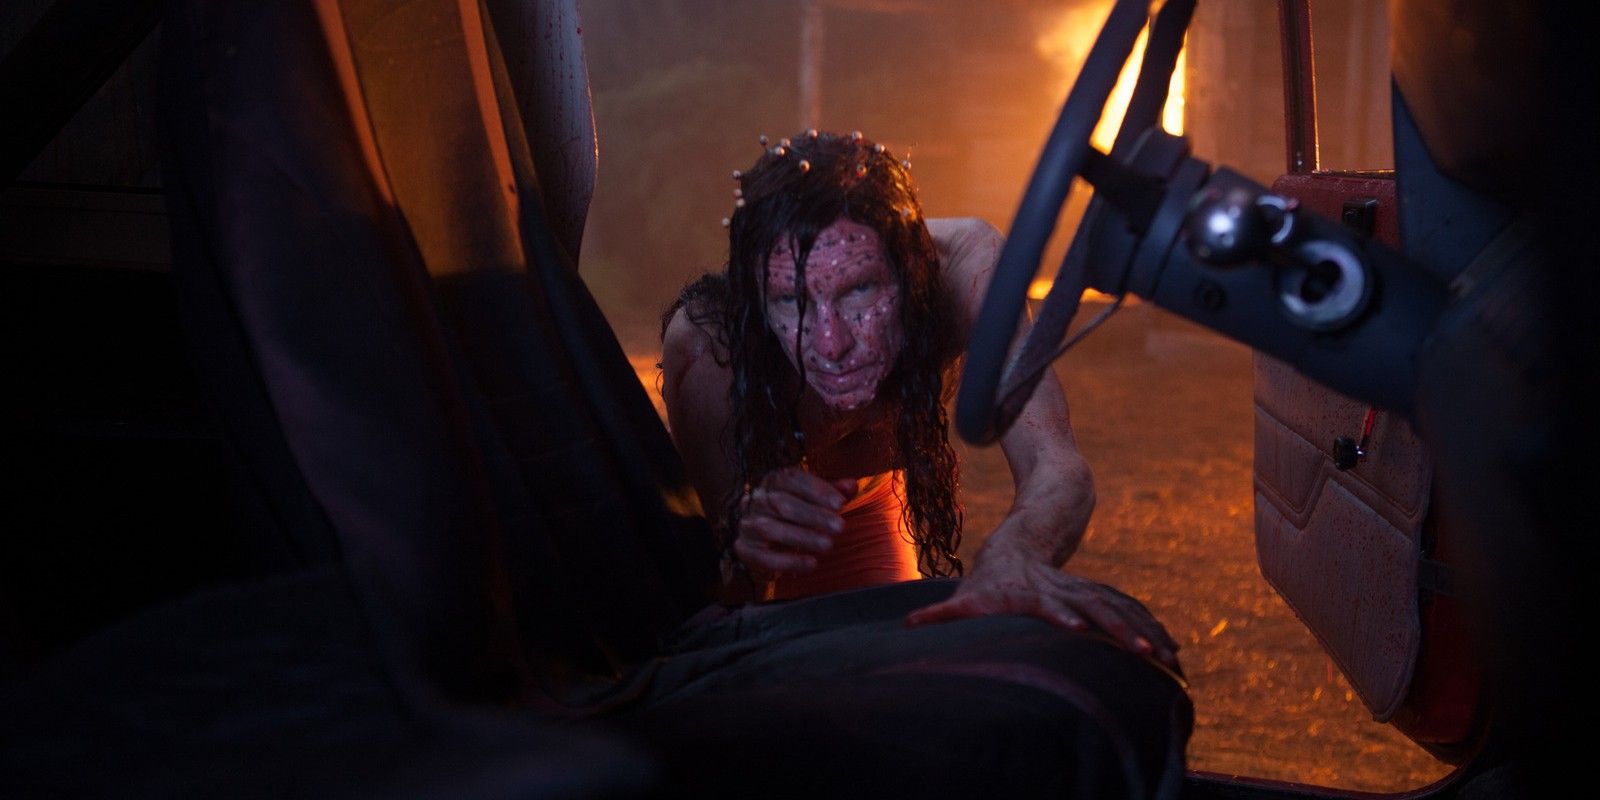 Evil Dead Video Reveals Never Before Seen Look at 2013's Gory Reboot